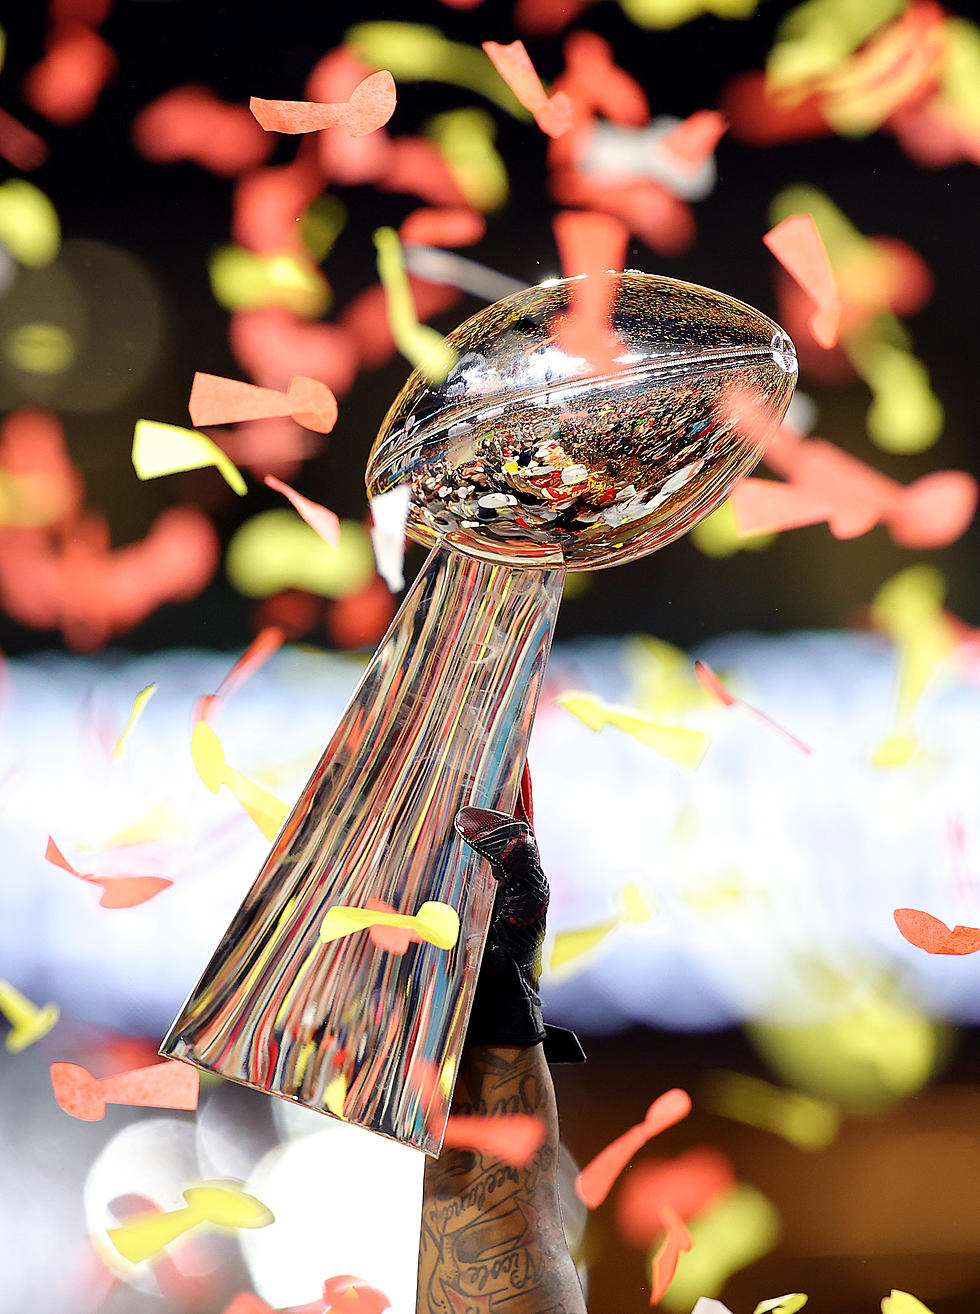 How many times each NFL team has hoisted the Lombardi Trophy on Super Bowl Sunday